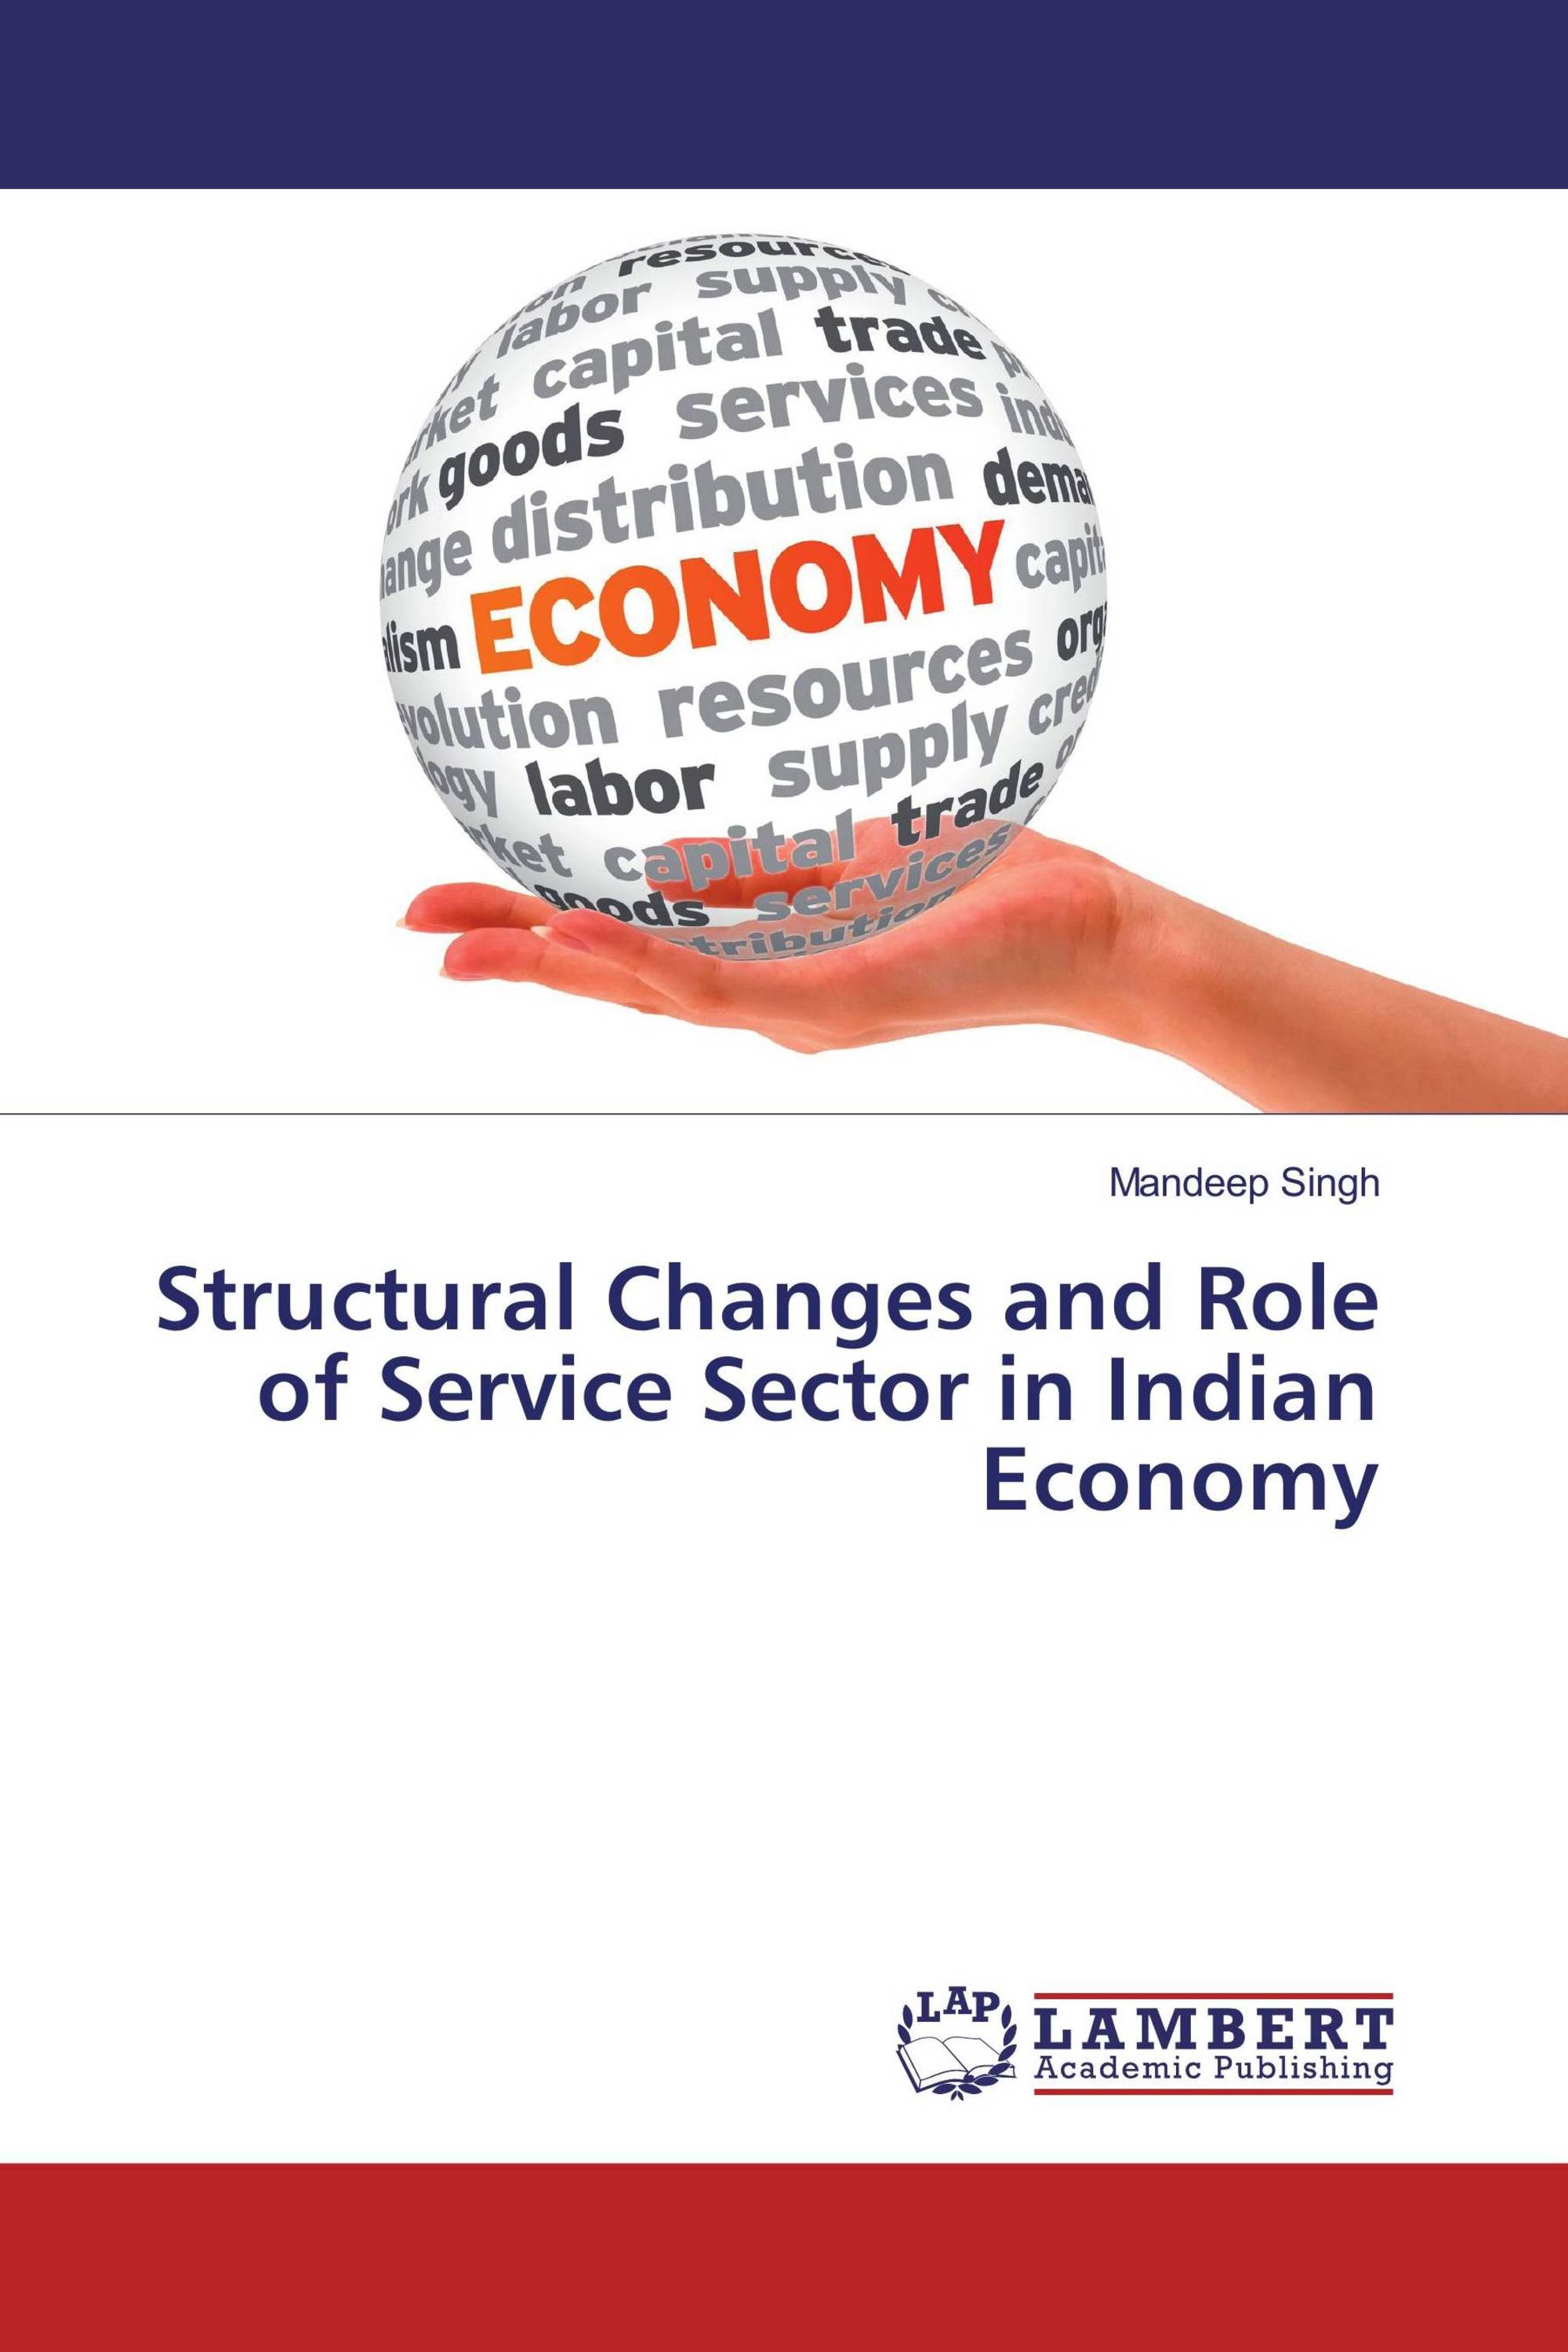 case study on service sector in india